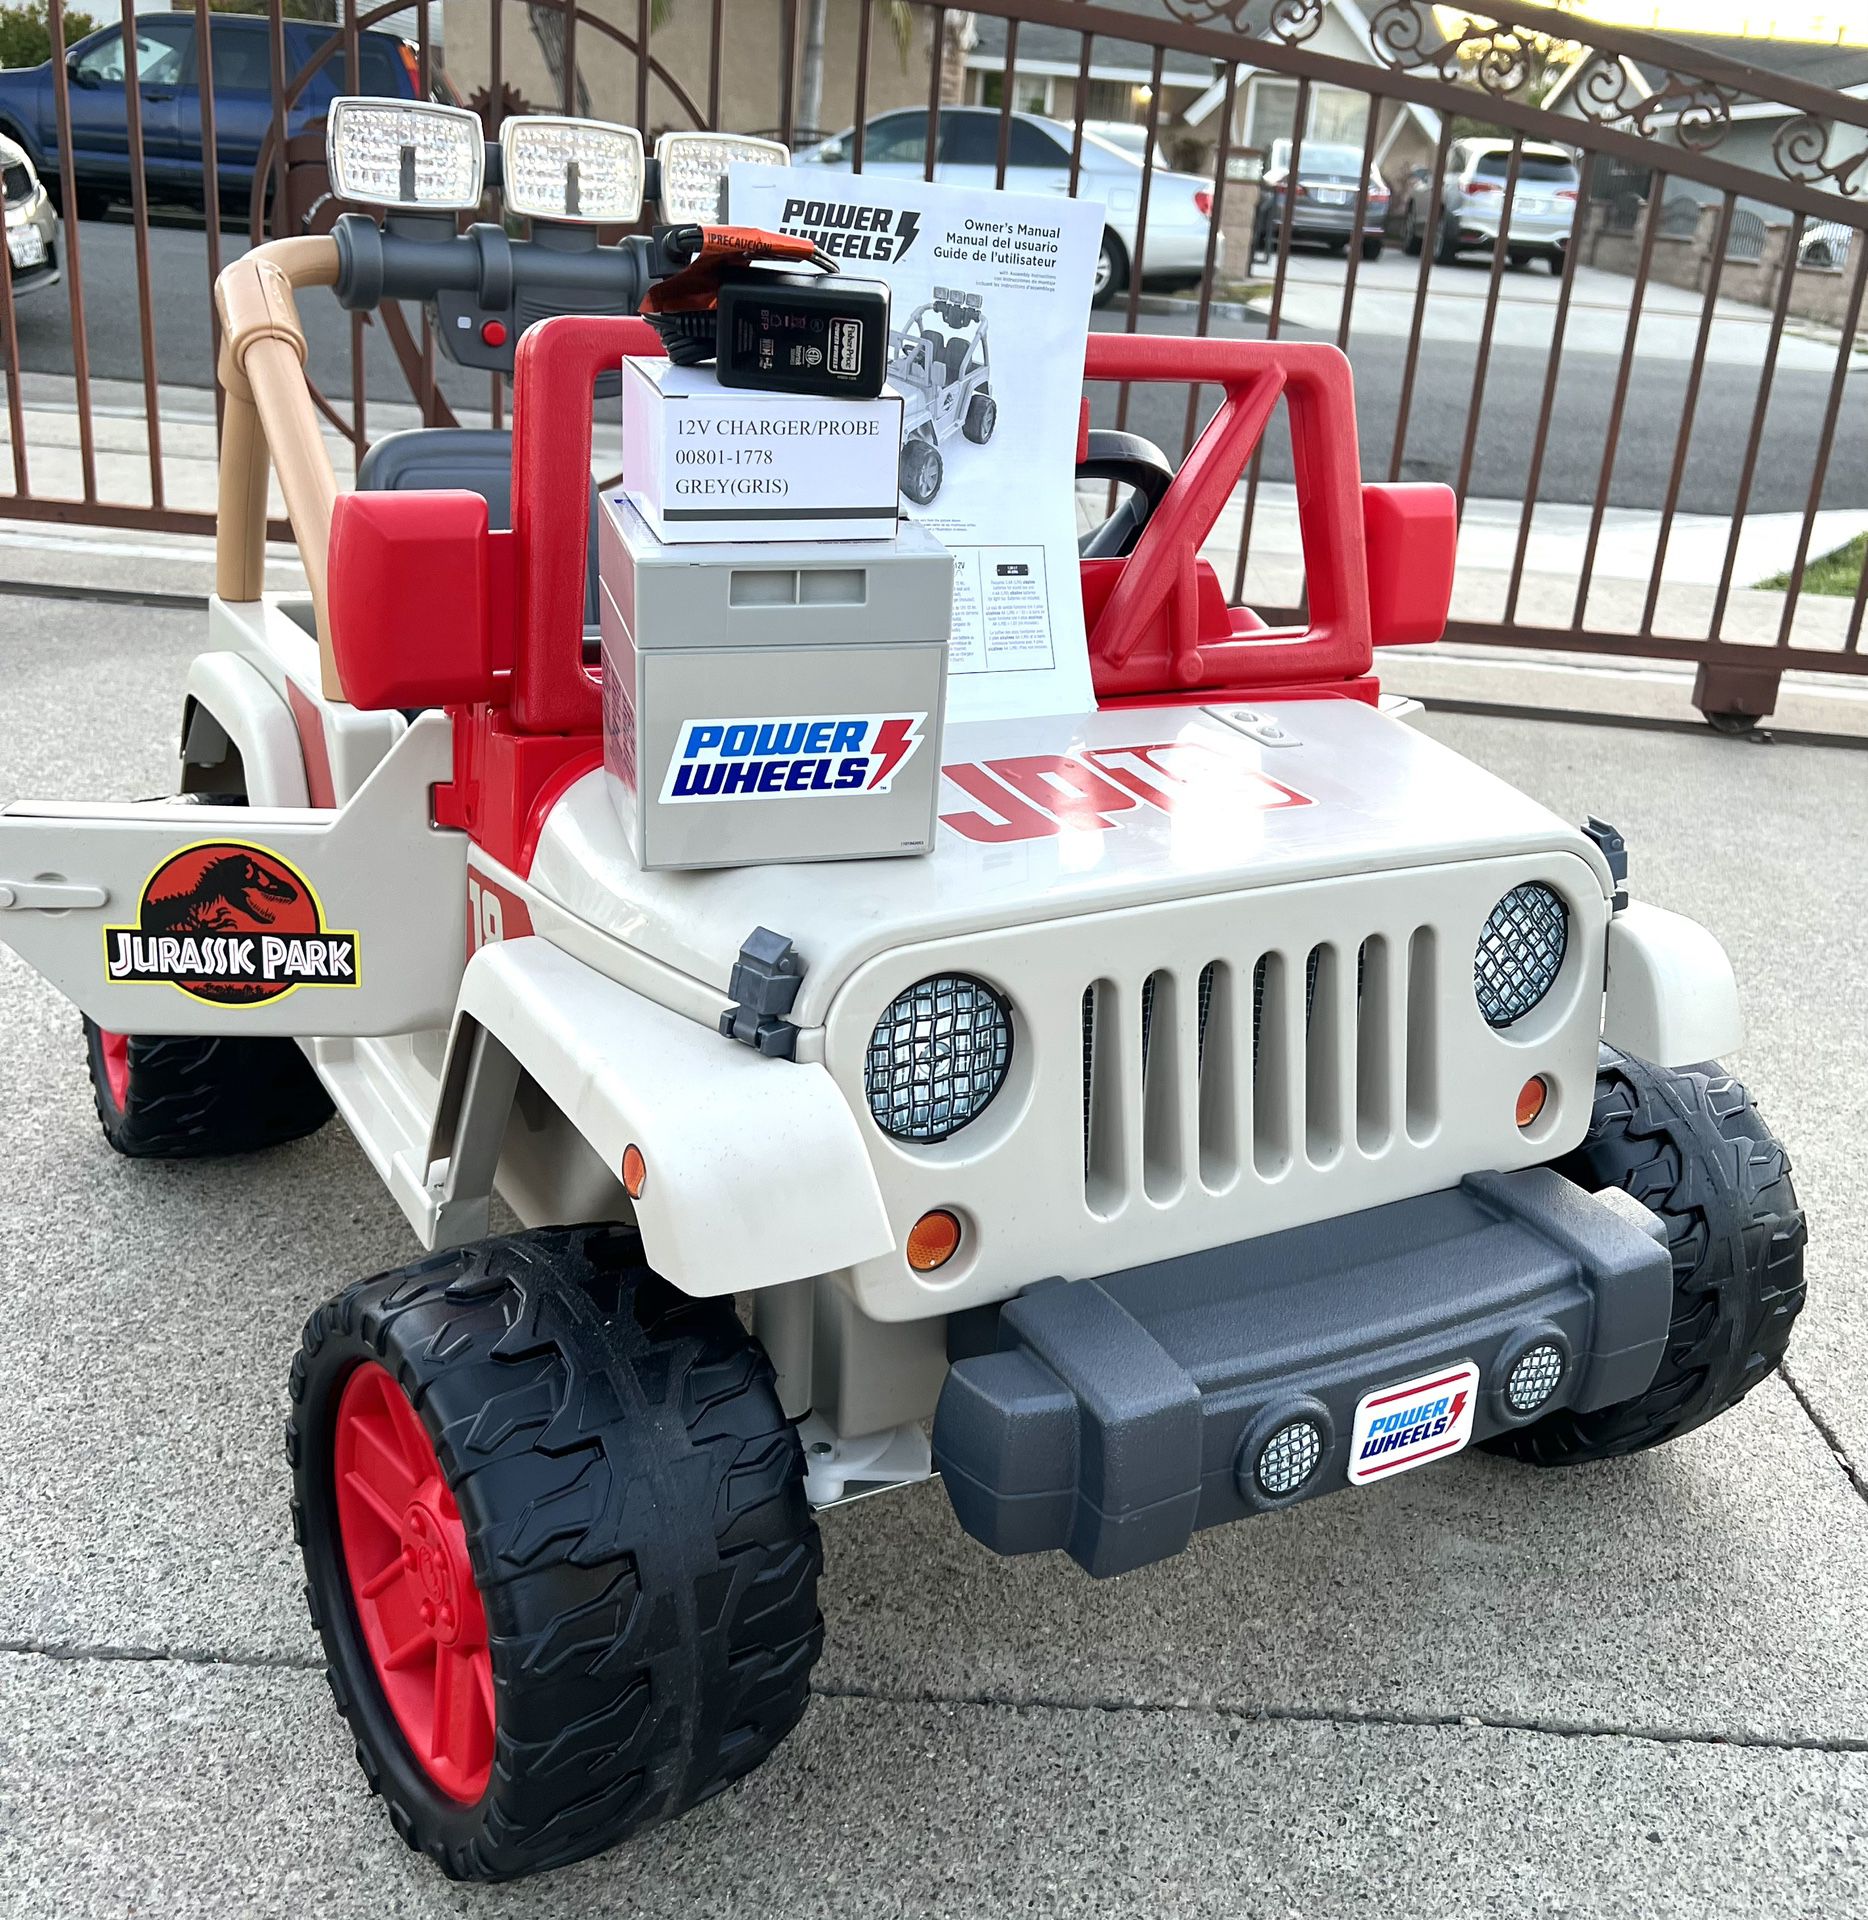 Jurassic Park Jeep Wrangler 12volt Electric Kid Ride On Car Power Wheels  for Sale in Irvine, CA - OfferUp